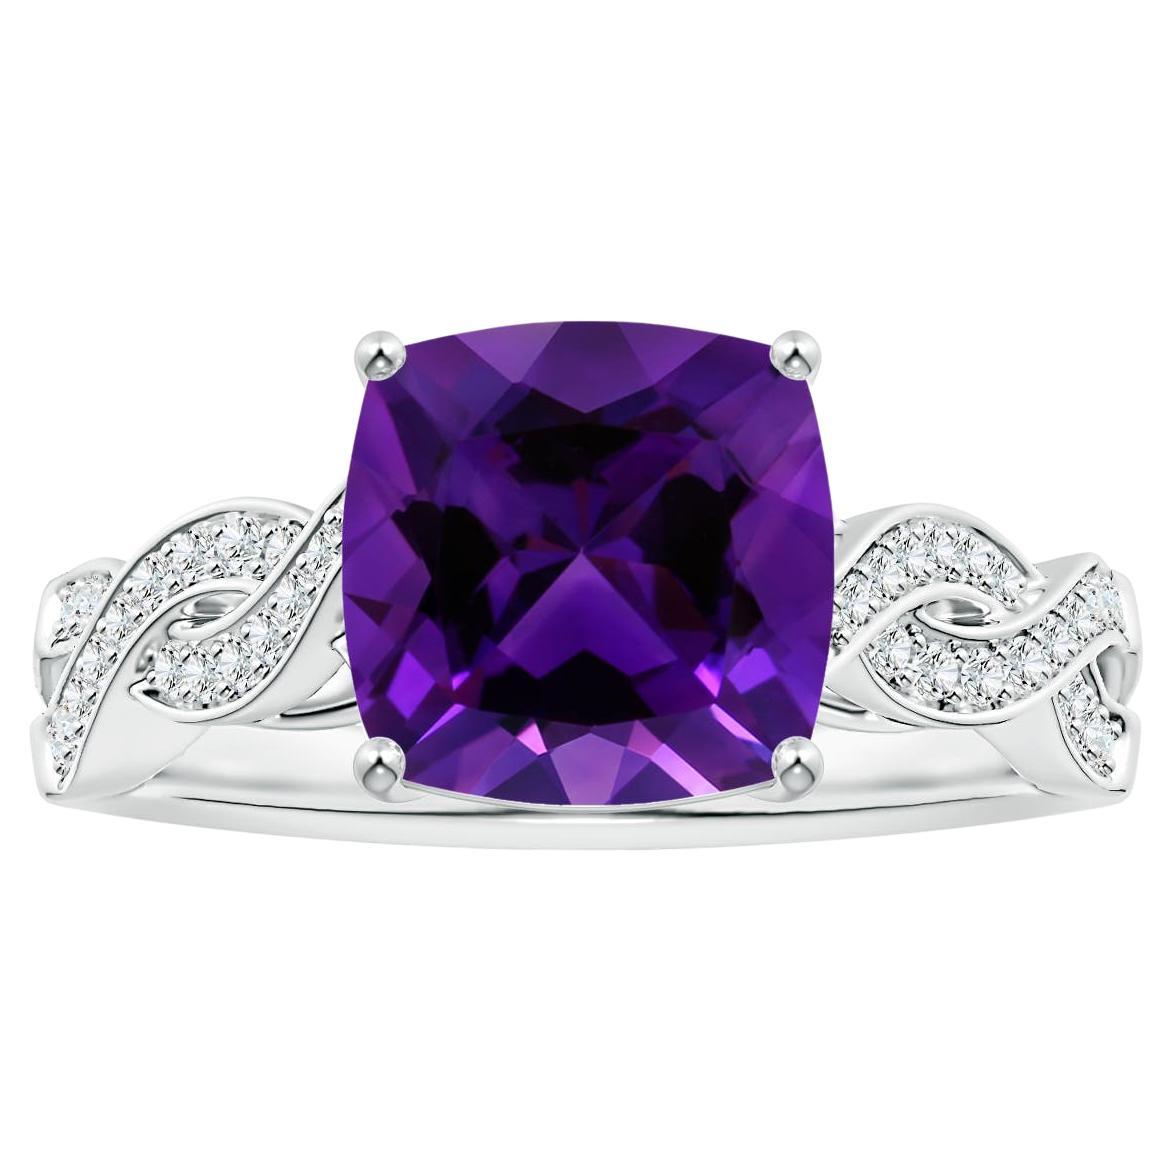 For Sale:  Angara Prong-Set Gia Certified Natural Amethyst Twist Shank Ring in White Gold